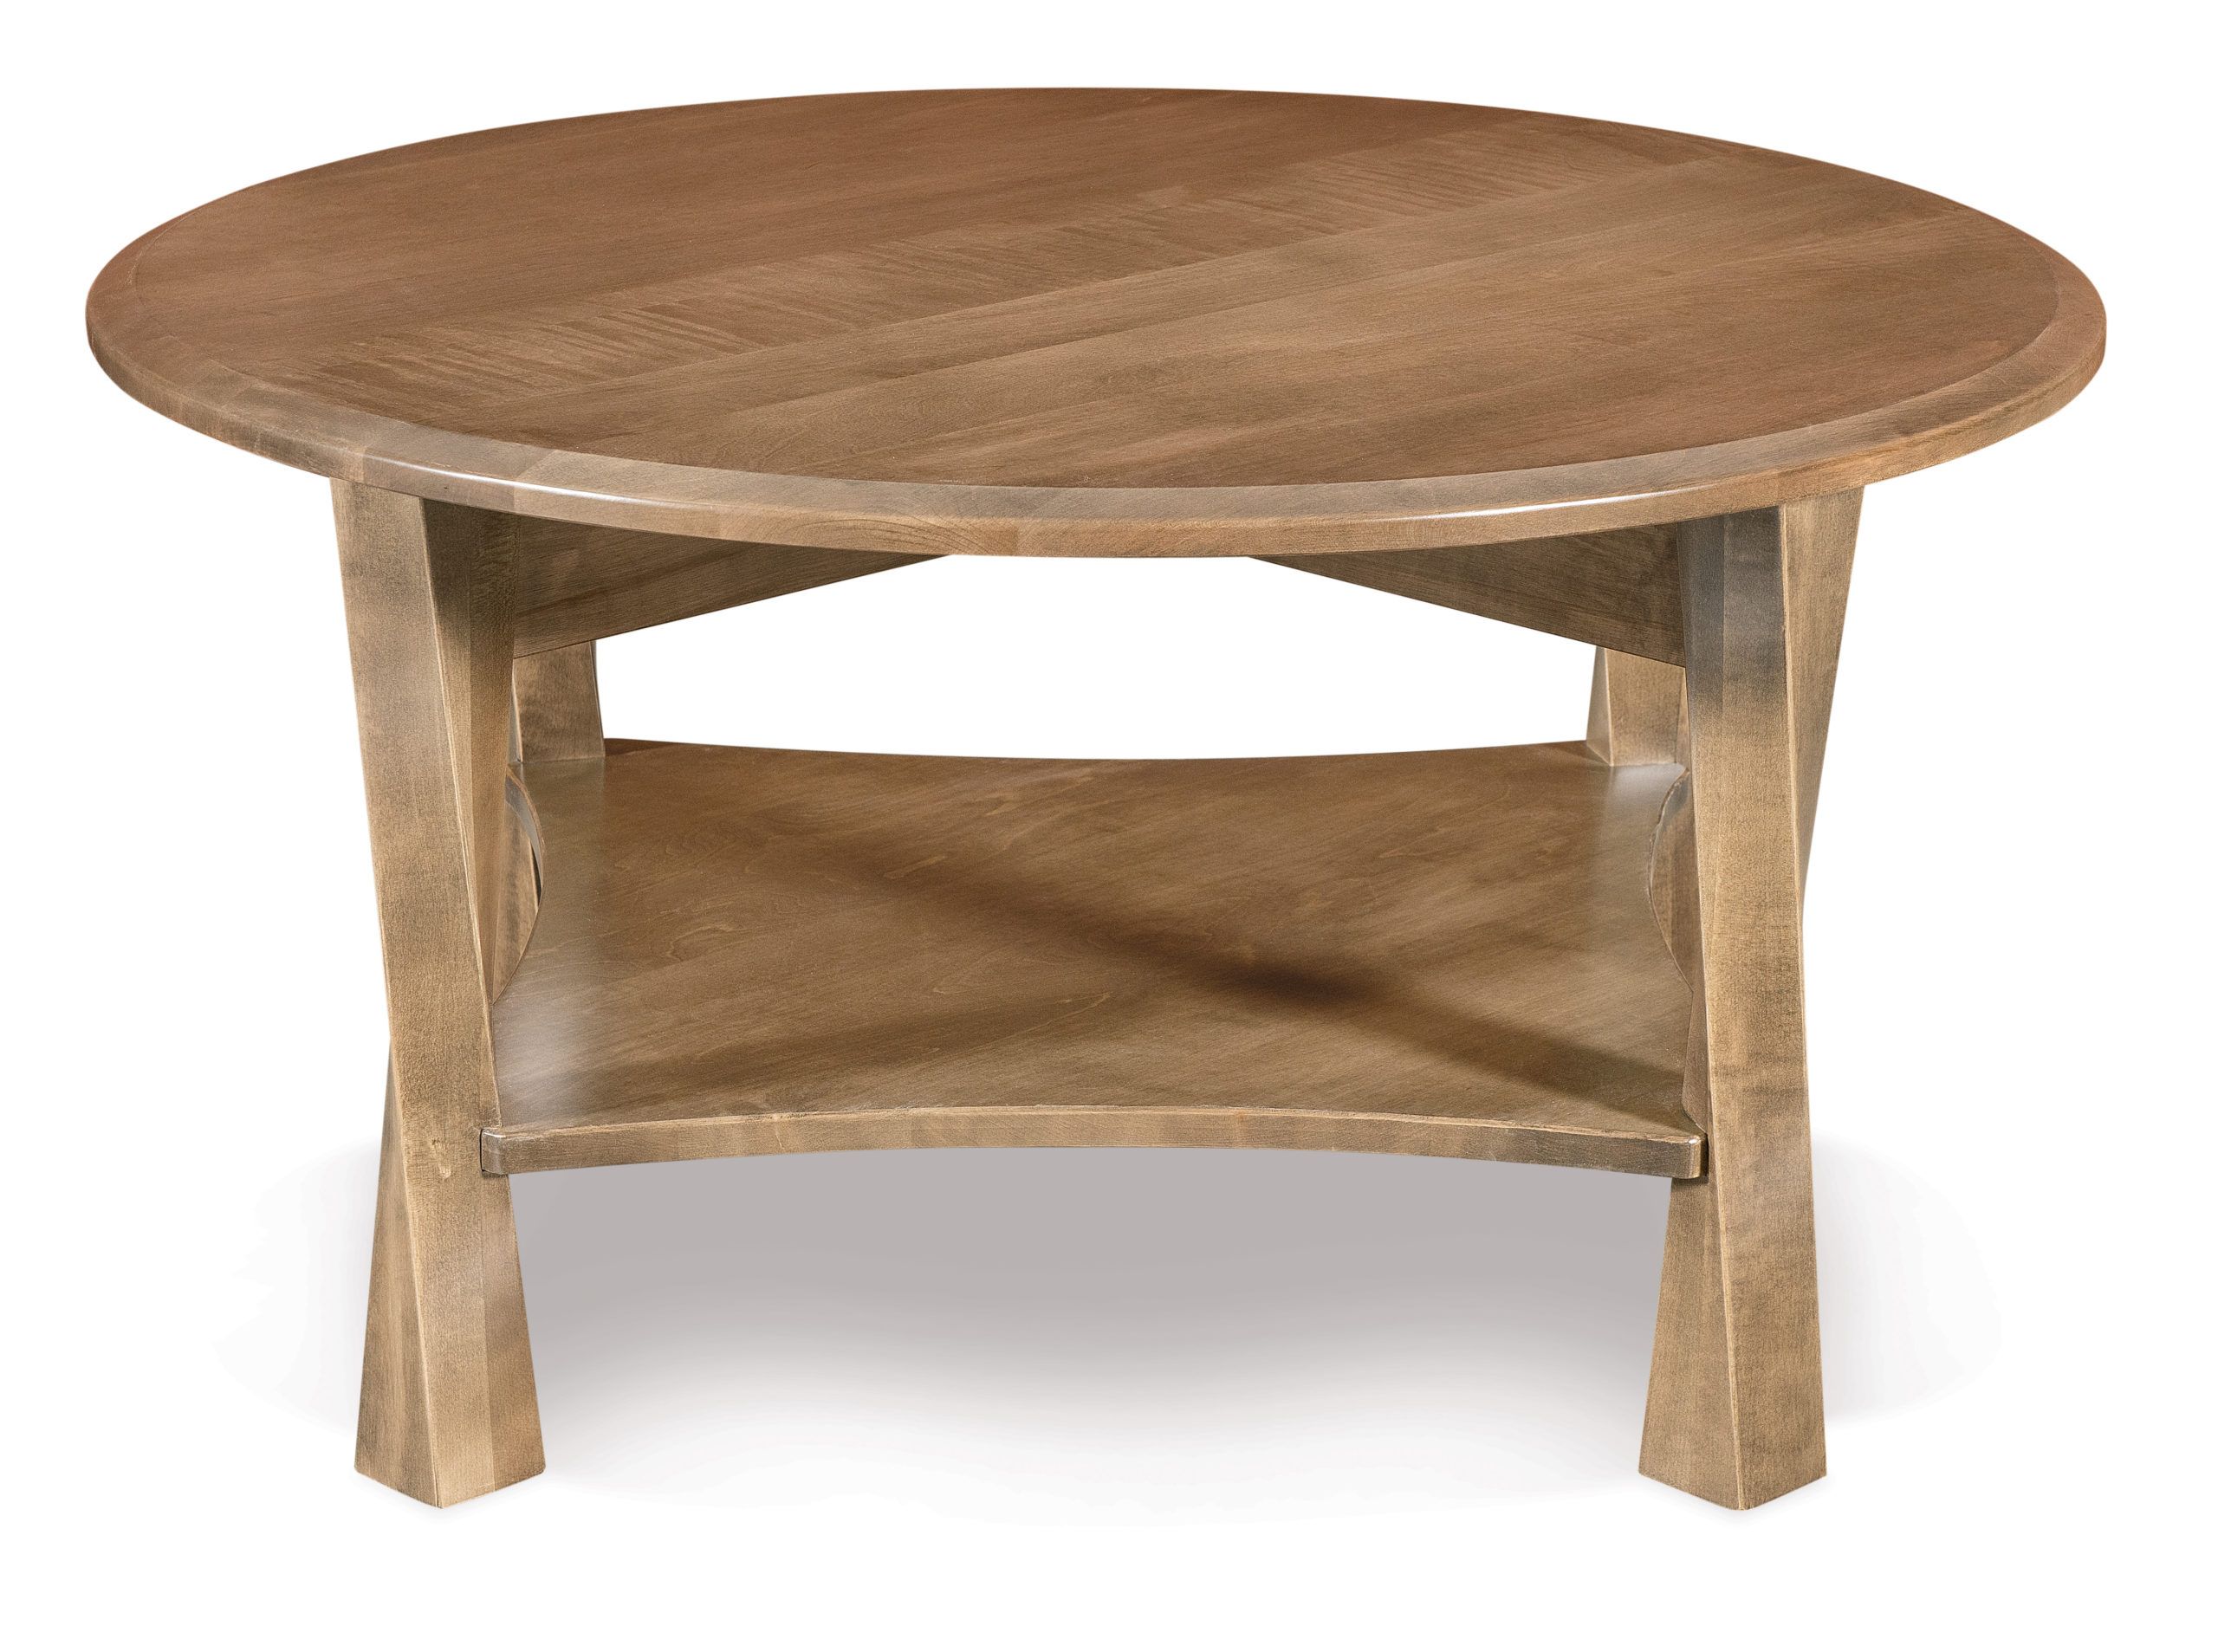 Lexington Arc Coffee Tables | Amish Solid Wood Occasional Tables For Occasional Coffee Tables (View 8 of 15)